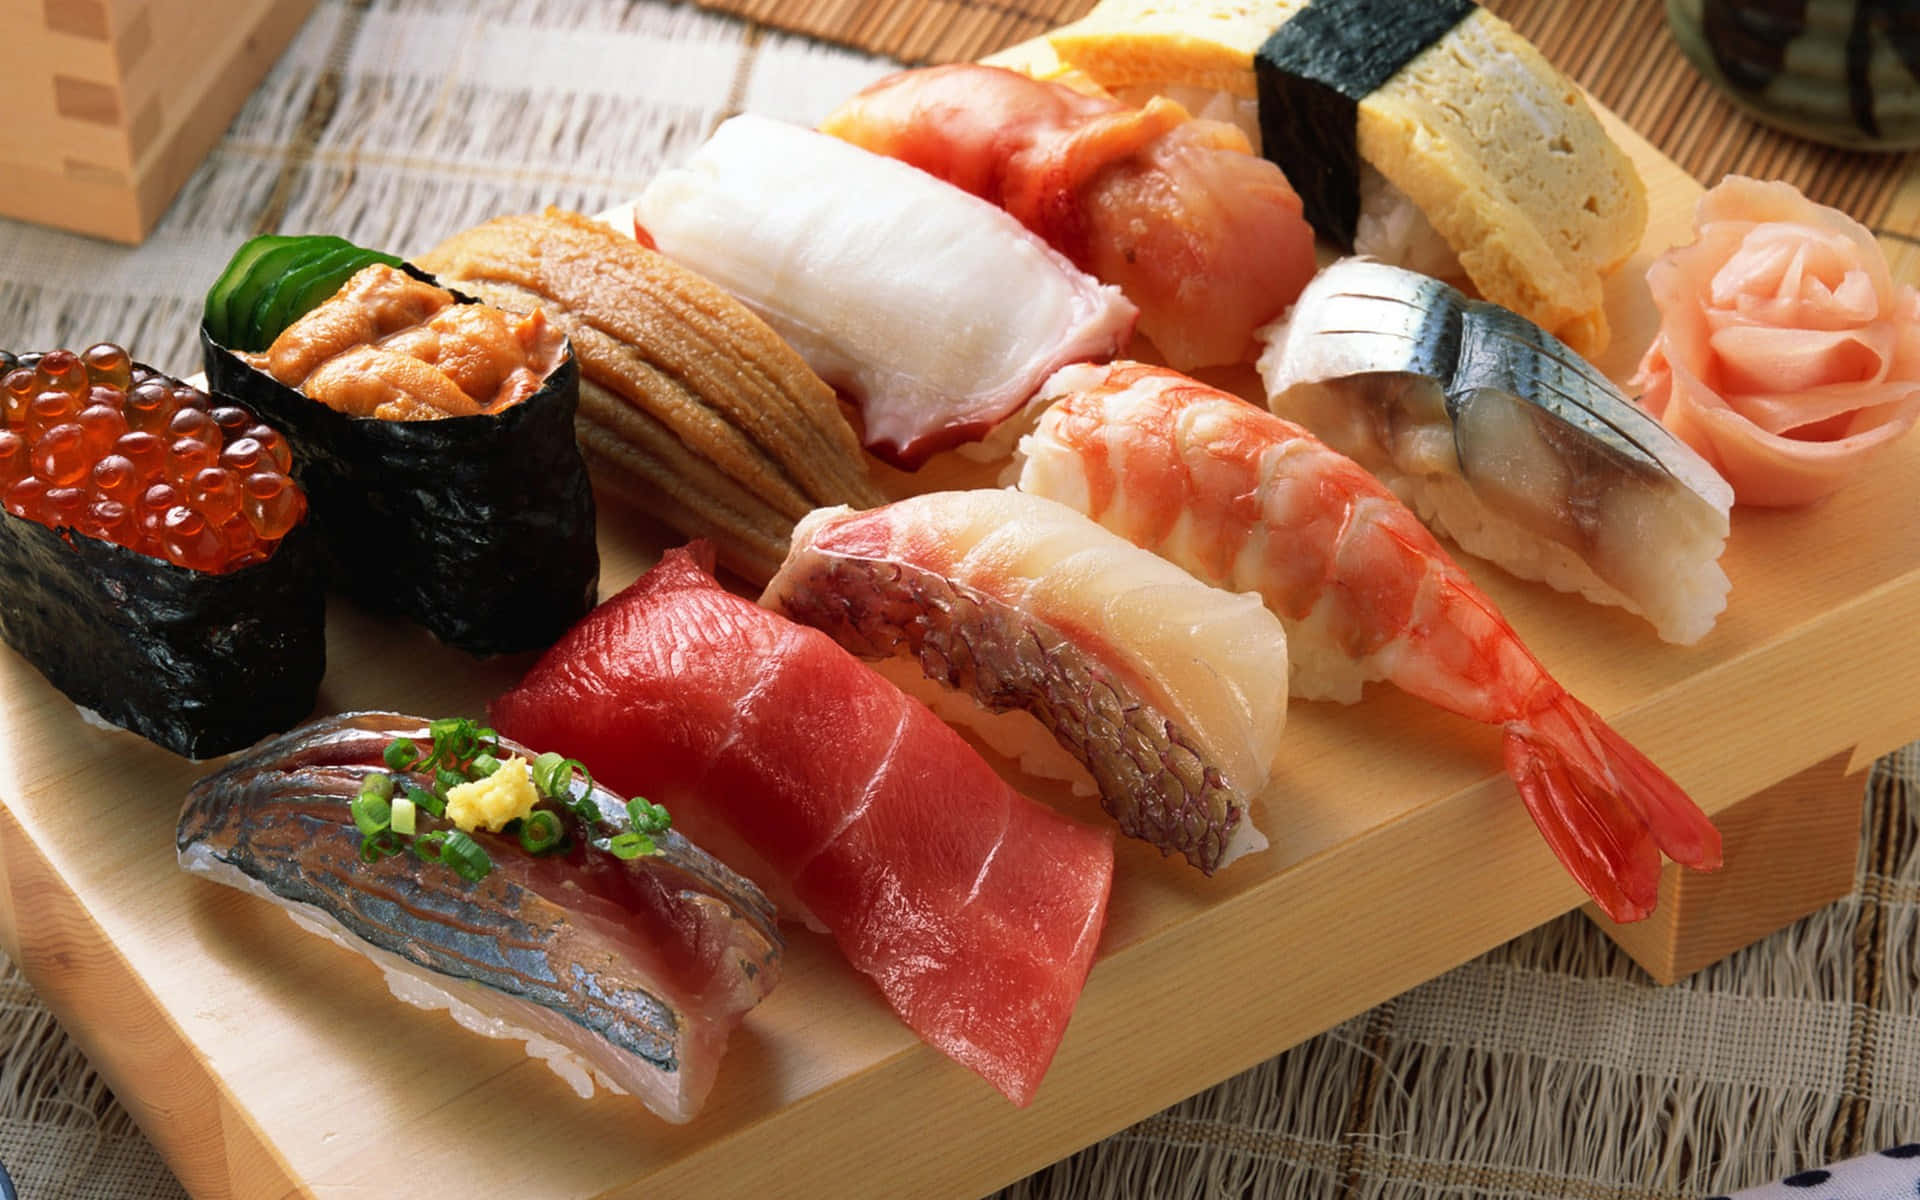 Delicious Sushi Platter on a Wooden Table